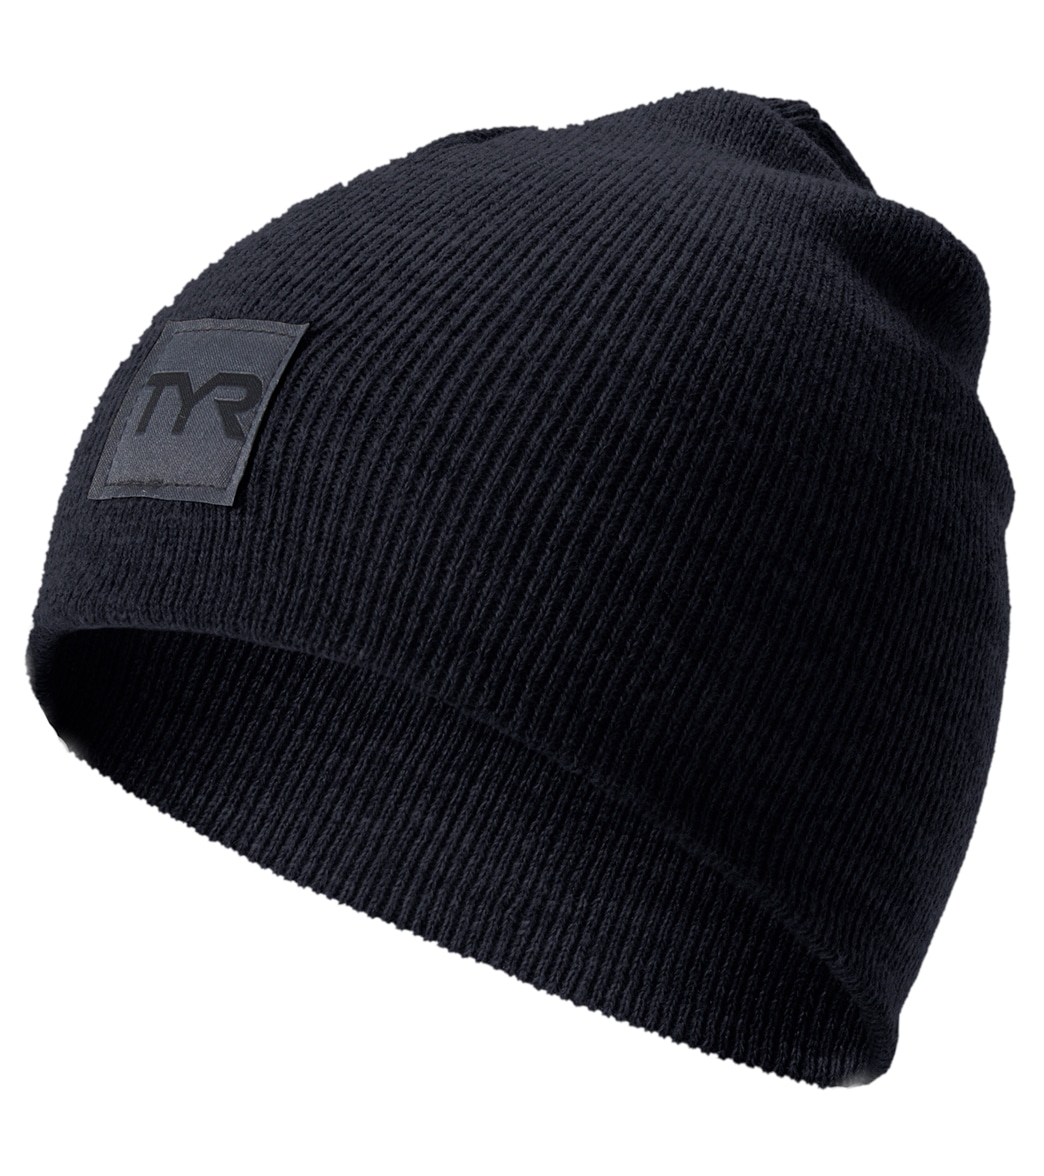 TYR Knit Beanie - Navy One Size - Swimoutlet.com